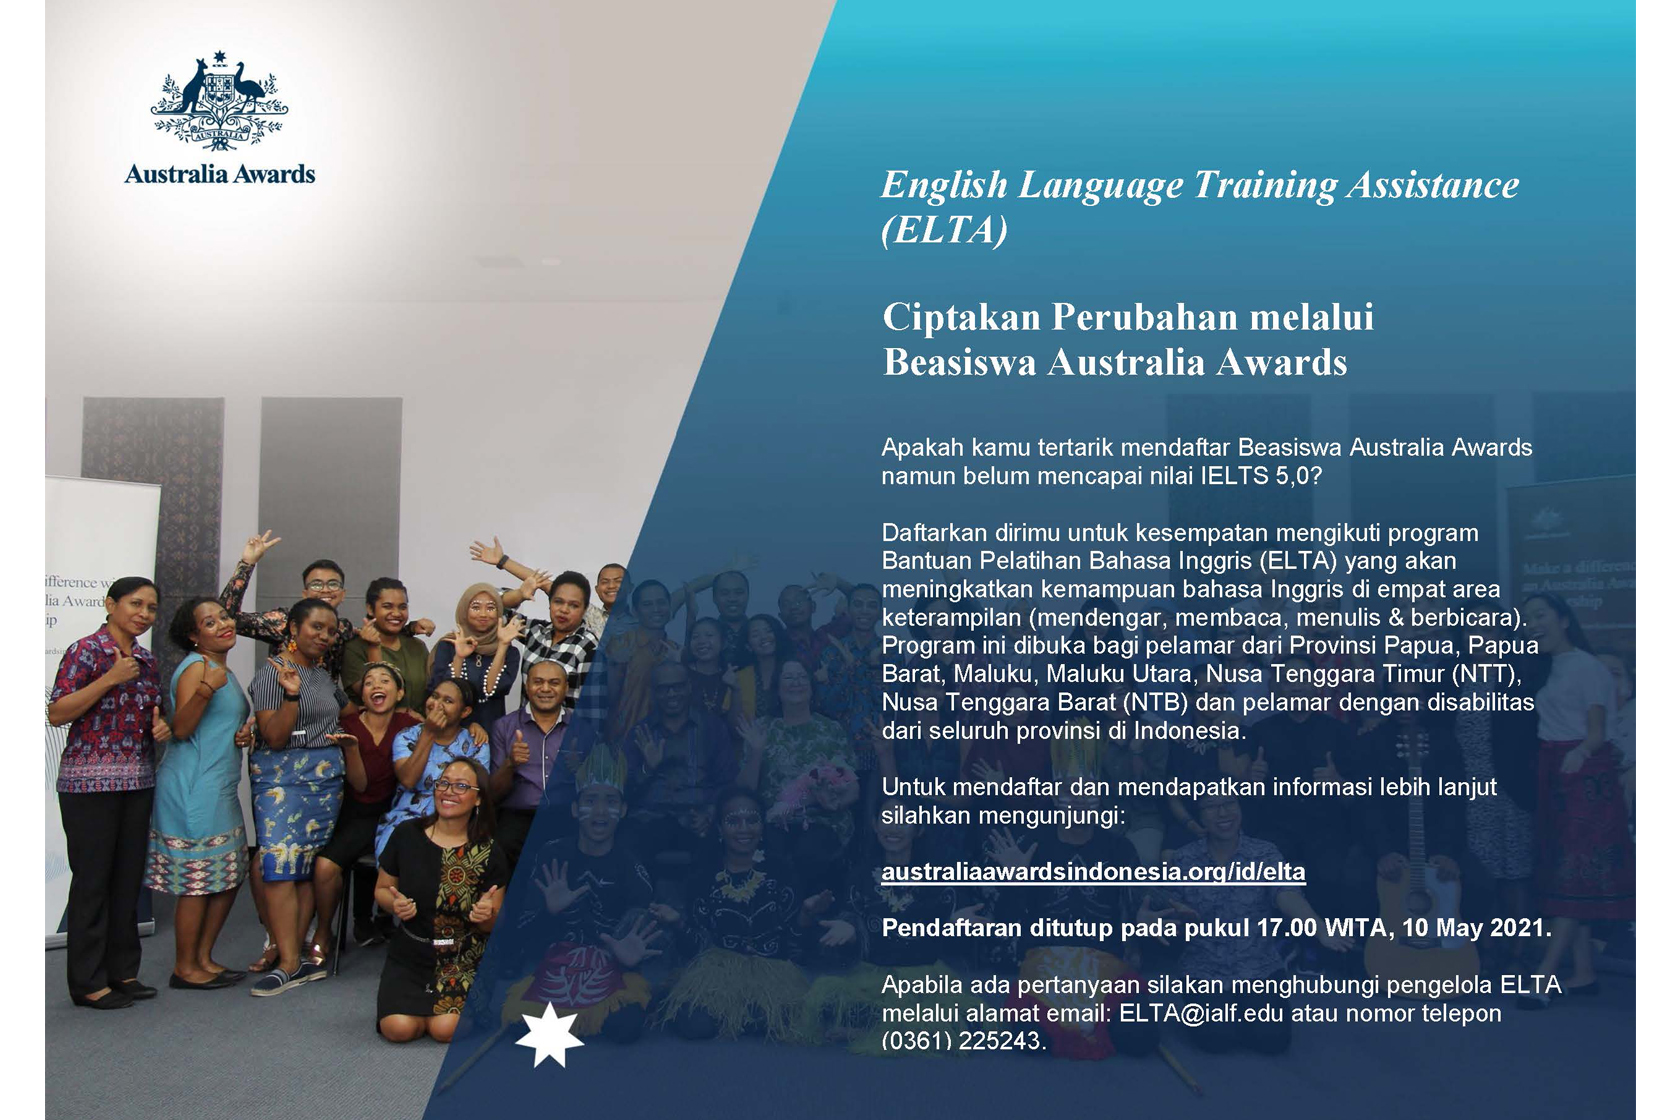 Applications Open for the English Language Training Assistance (ELTA) 2021